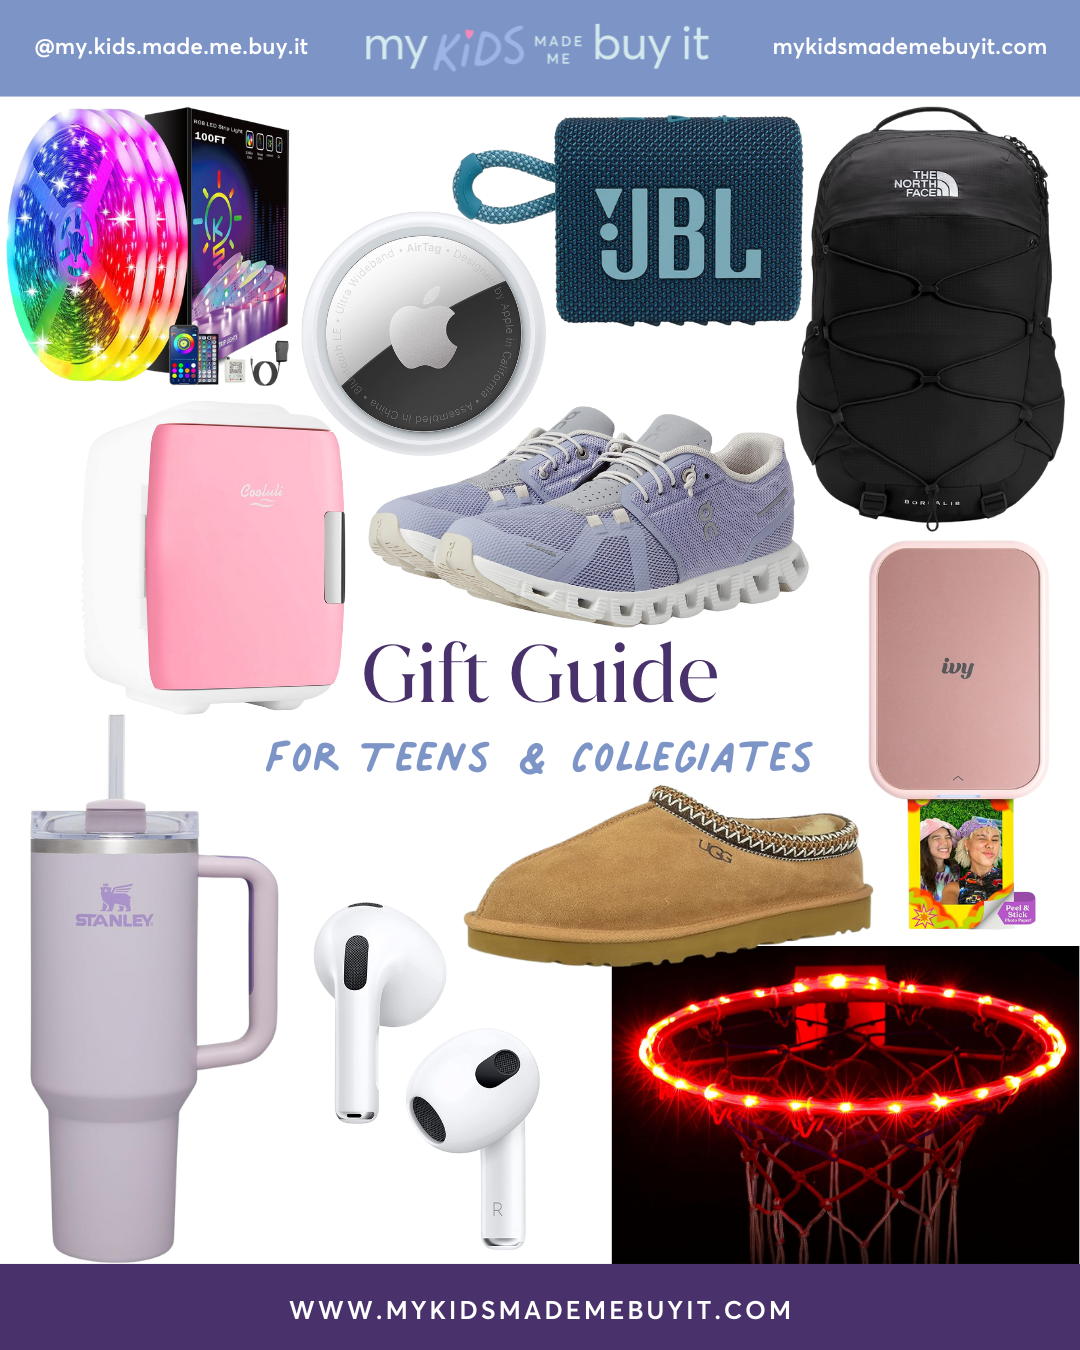 Gifts for Teens & Collegiates